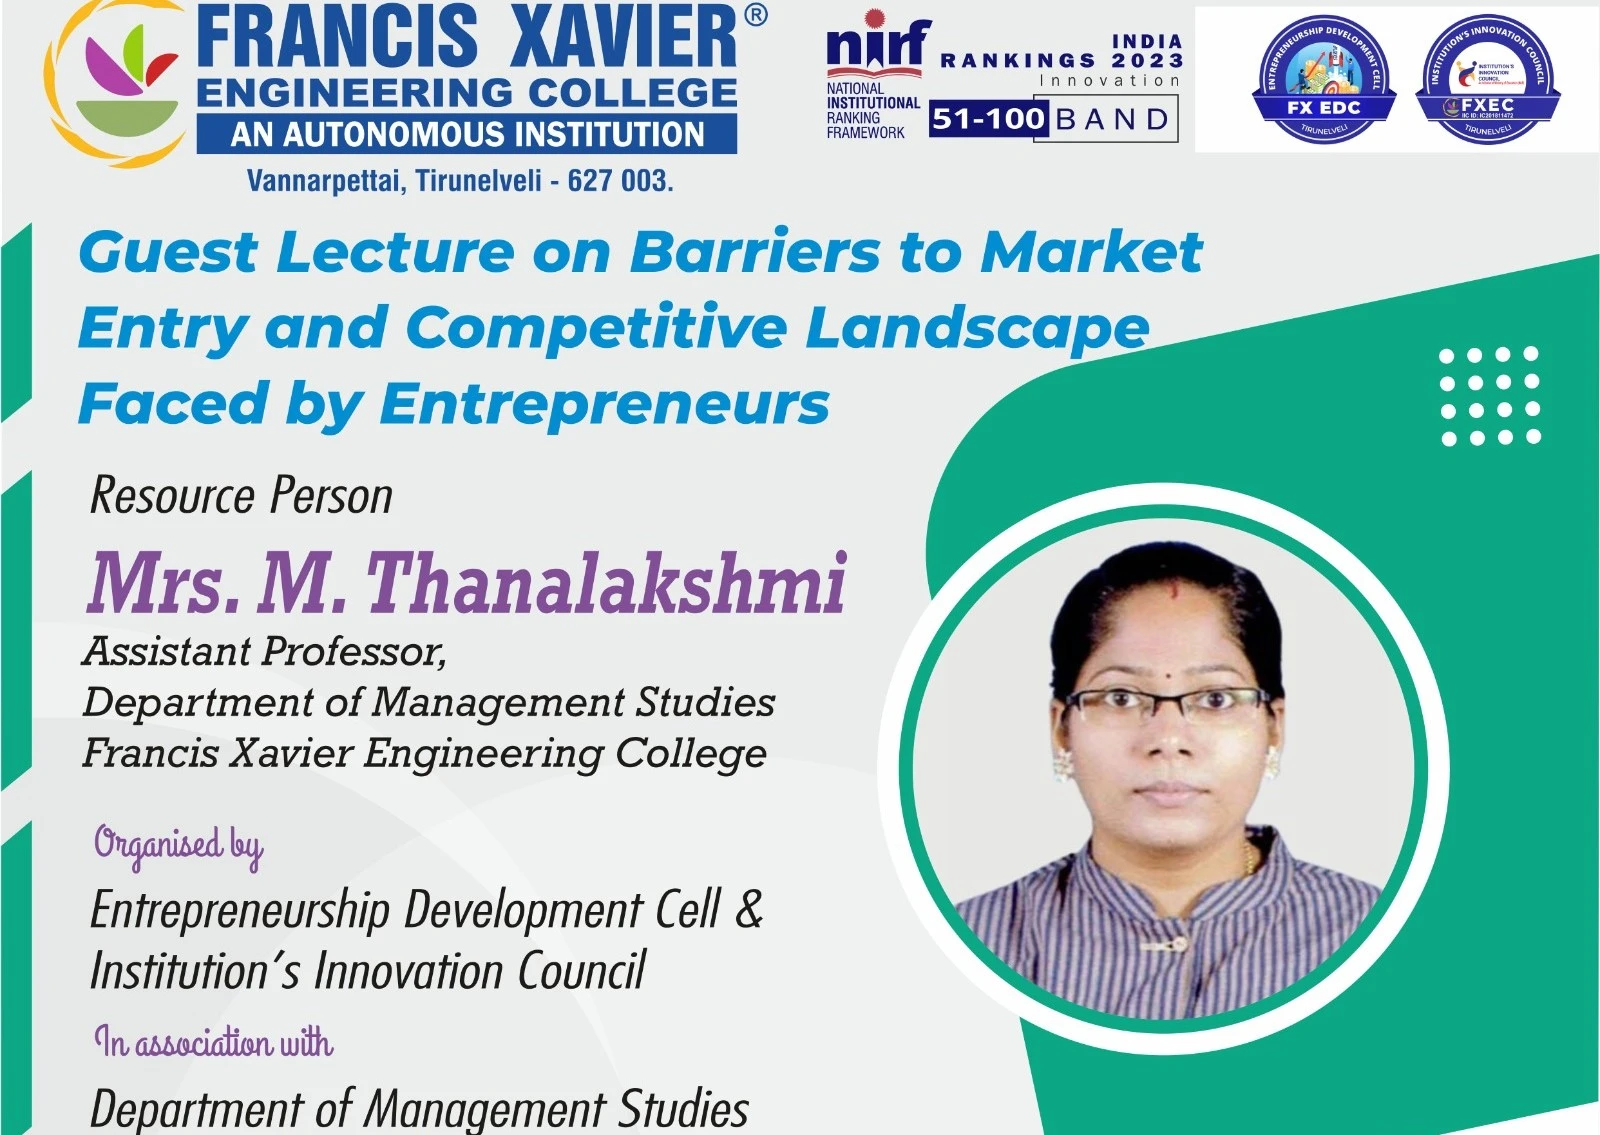 Guest Lecture on Barriers to Market Entry & Competitive Landscape Faced by Entrepreneurs